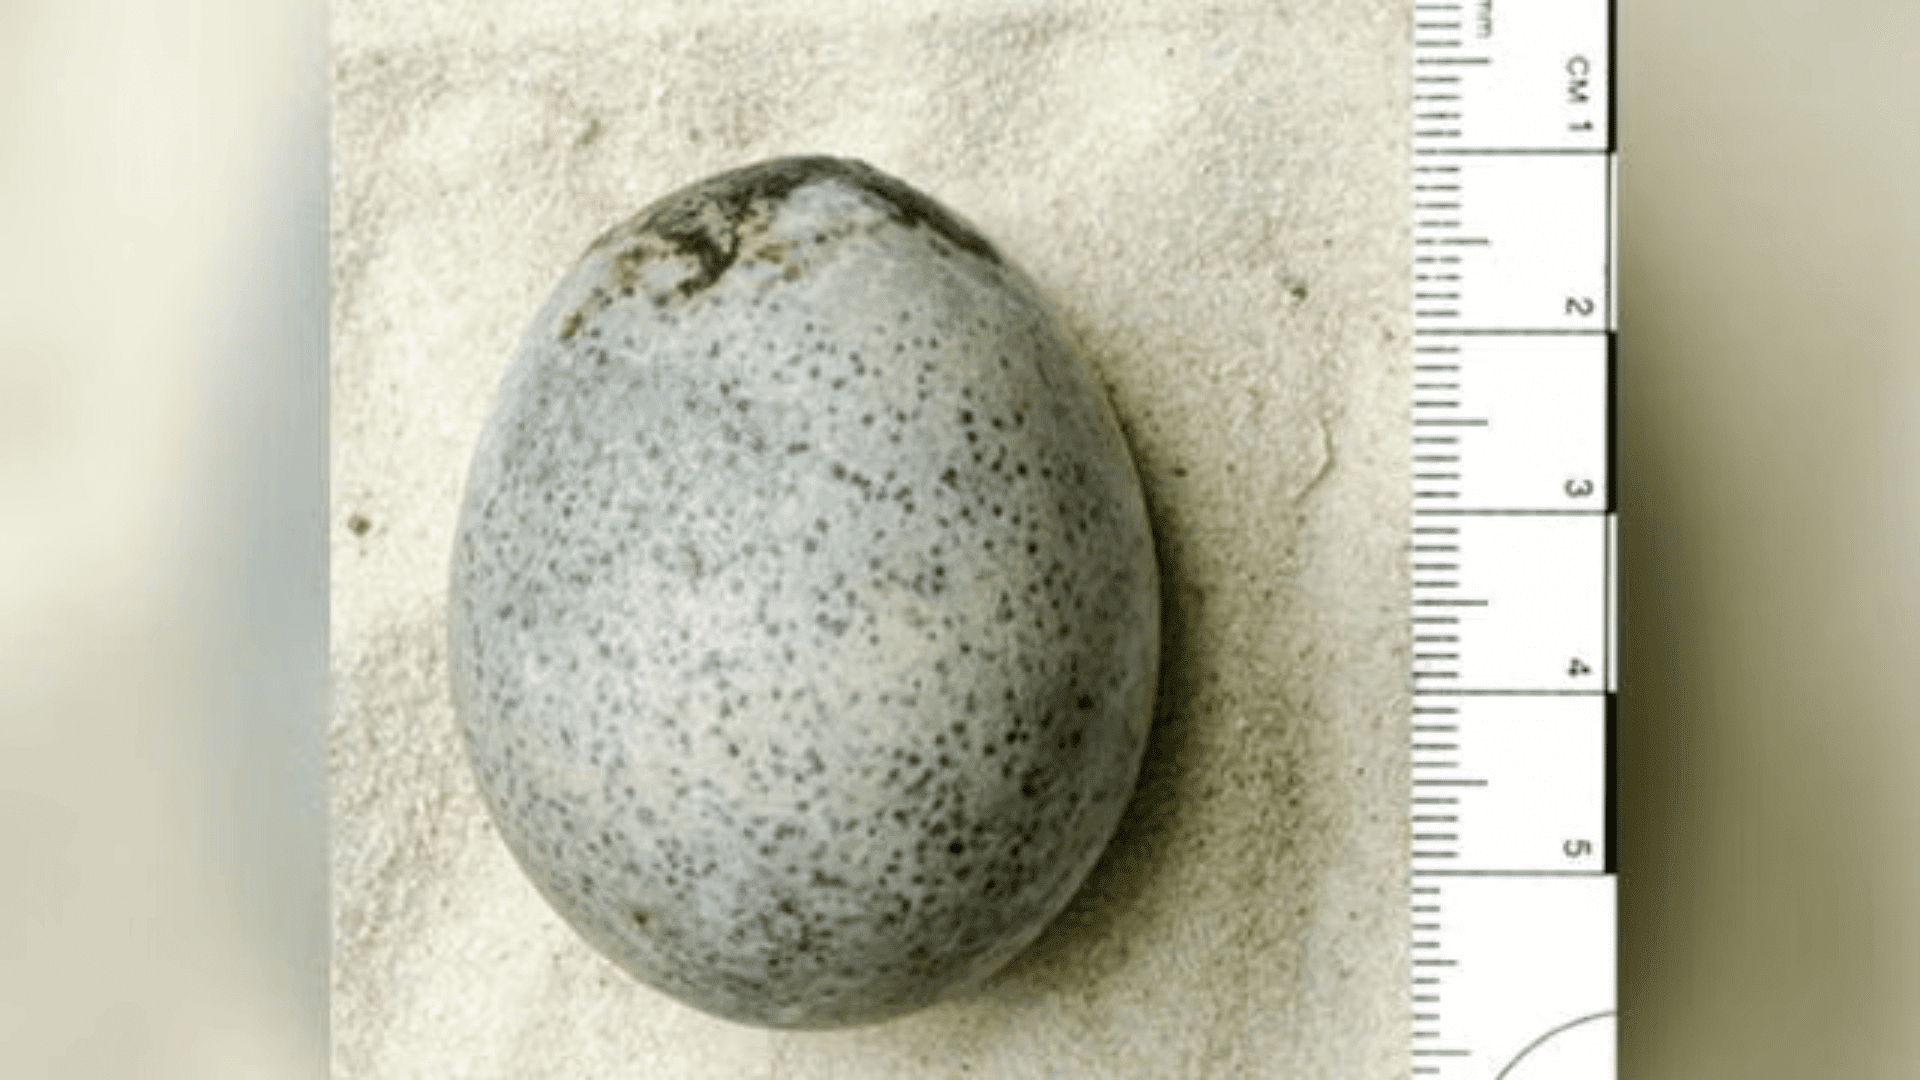 A Roman egg discovered in Aylesbury is believed to be the only one of its kind (Oxford Archaeology)